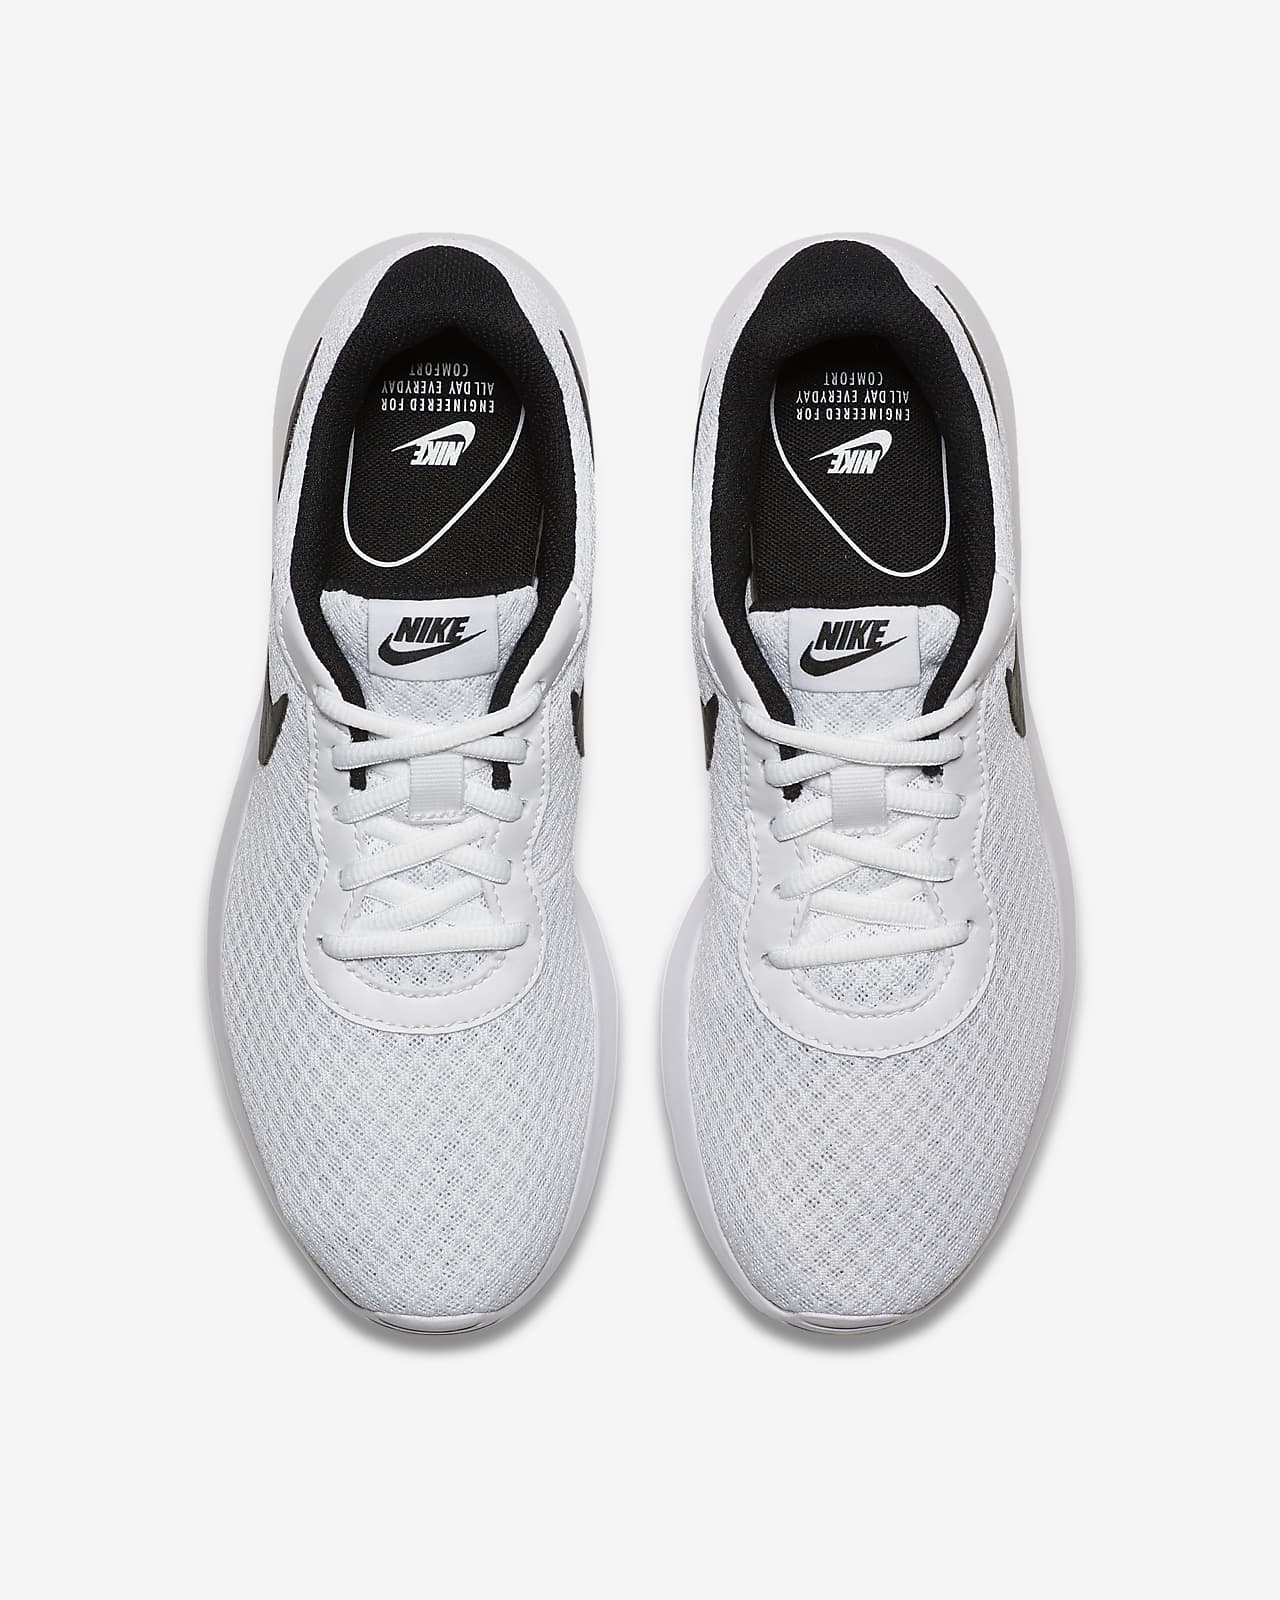 nike women's white and black shoes